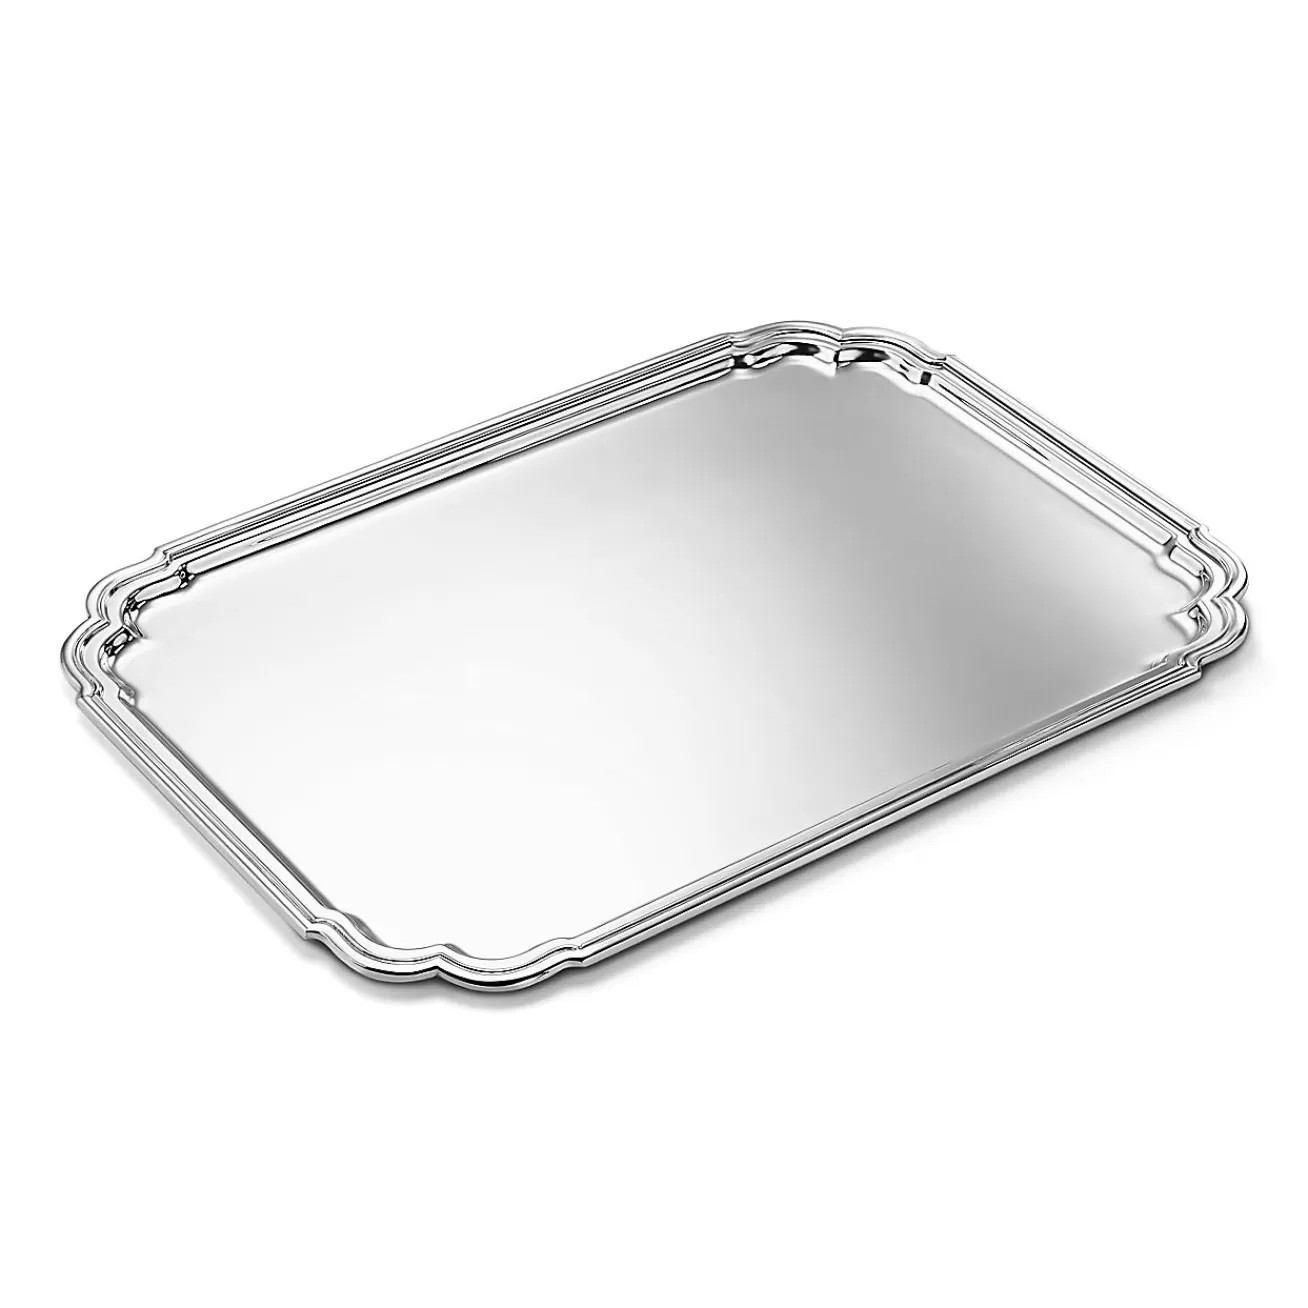 Tiffany & Co. Governor cut-corner rectangular tray in sterling silver. | ^ Gifts to Personalize | Tableware